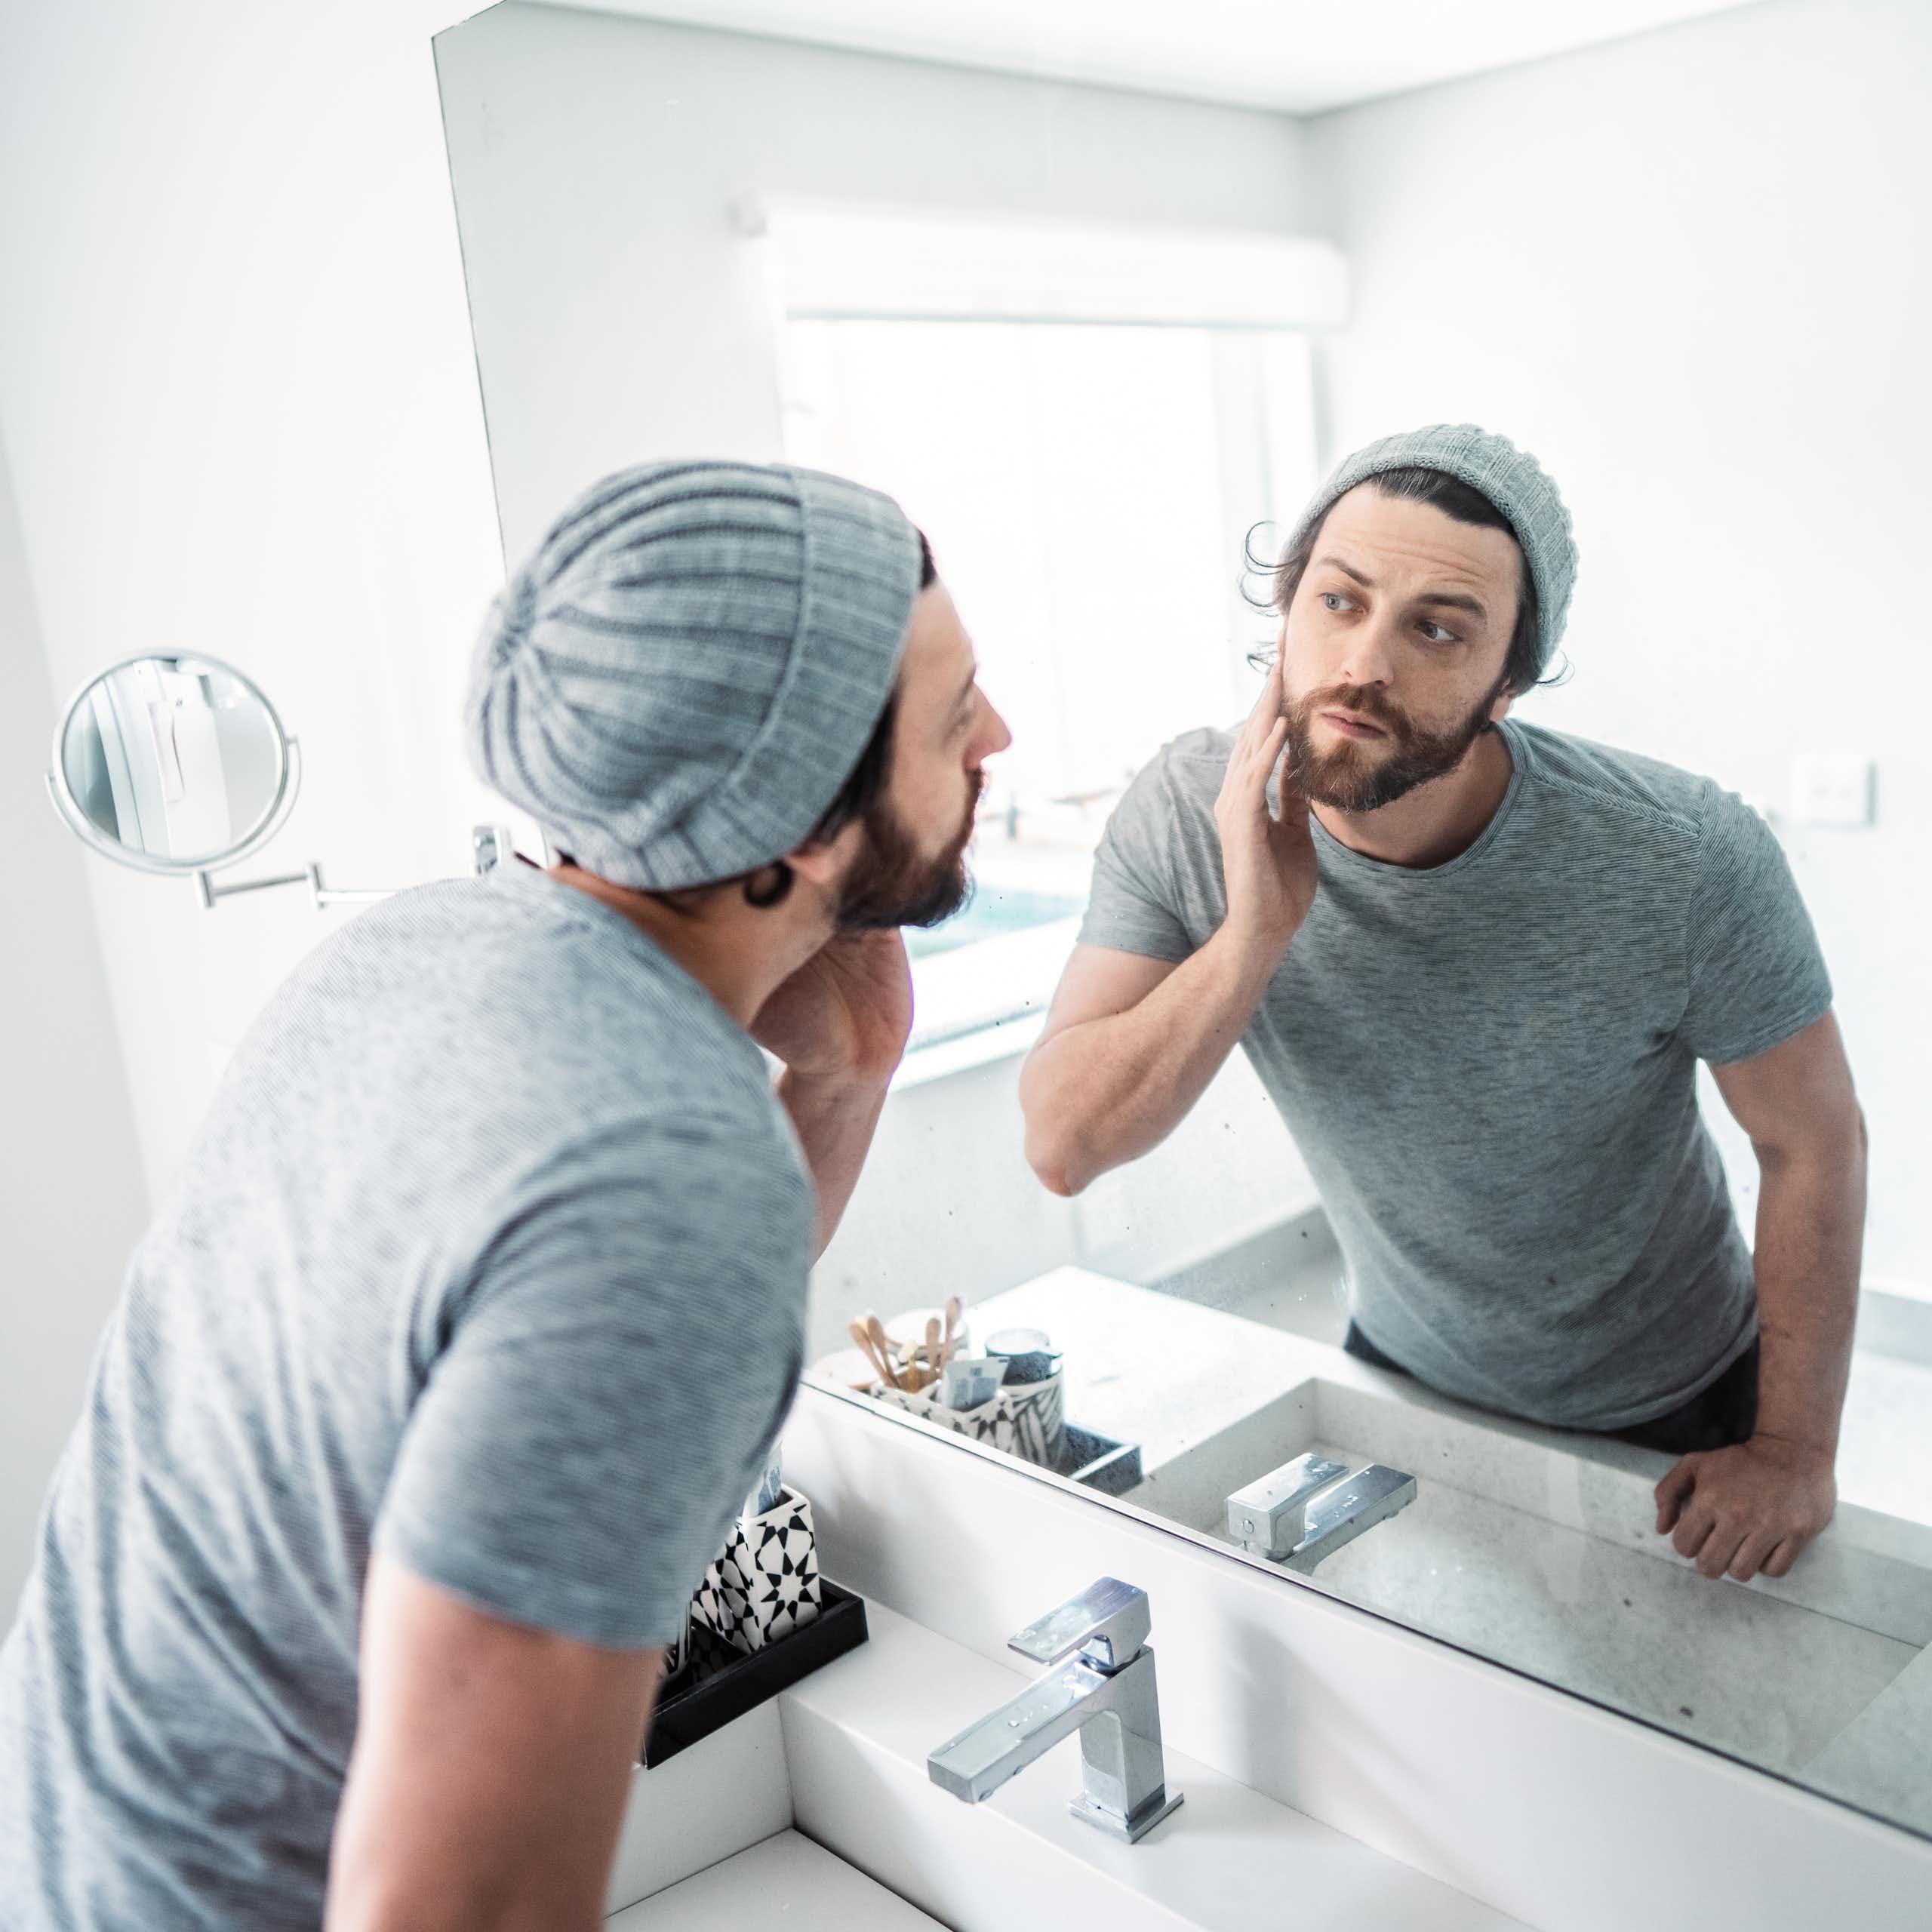 a young bearded man wearing a knit cap and t-shirt touches his face as he looks at himself in a bathroom mirror